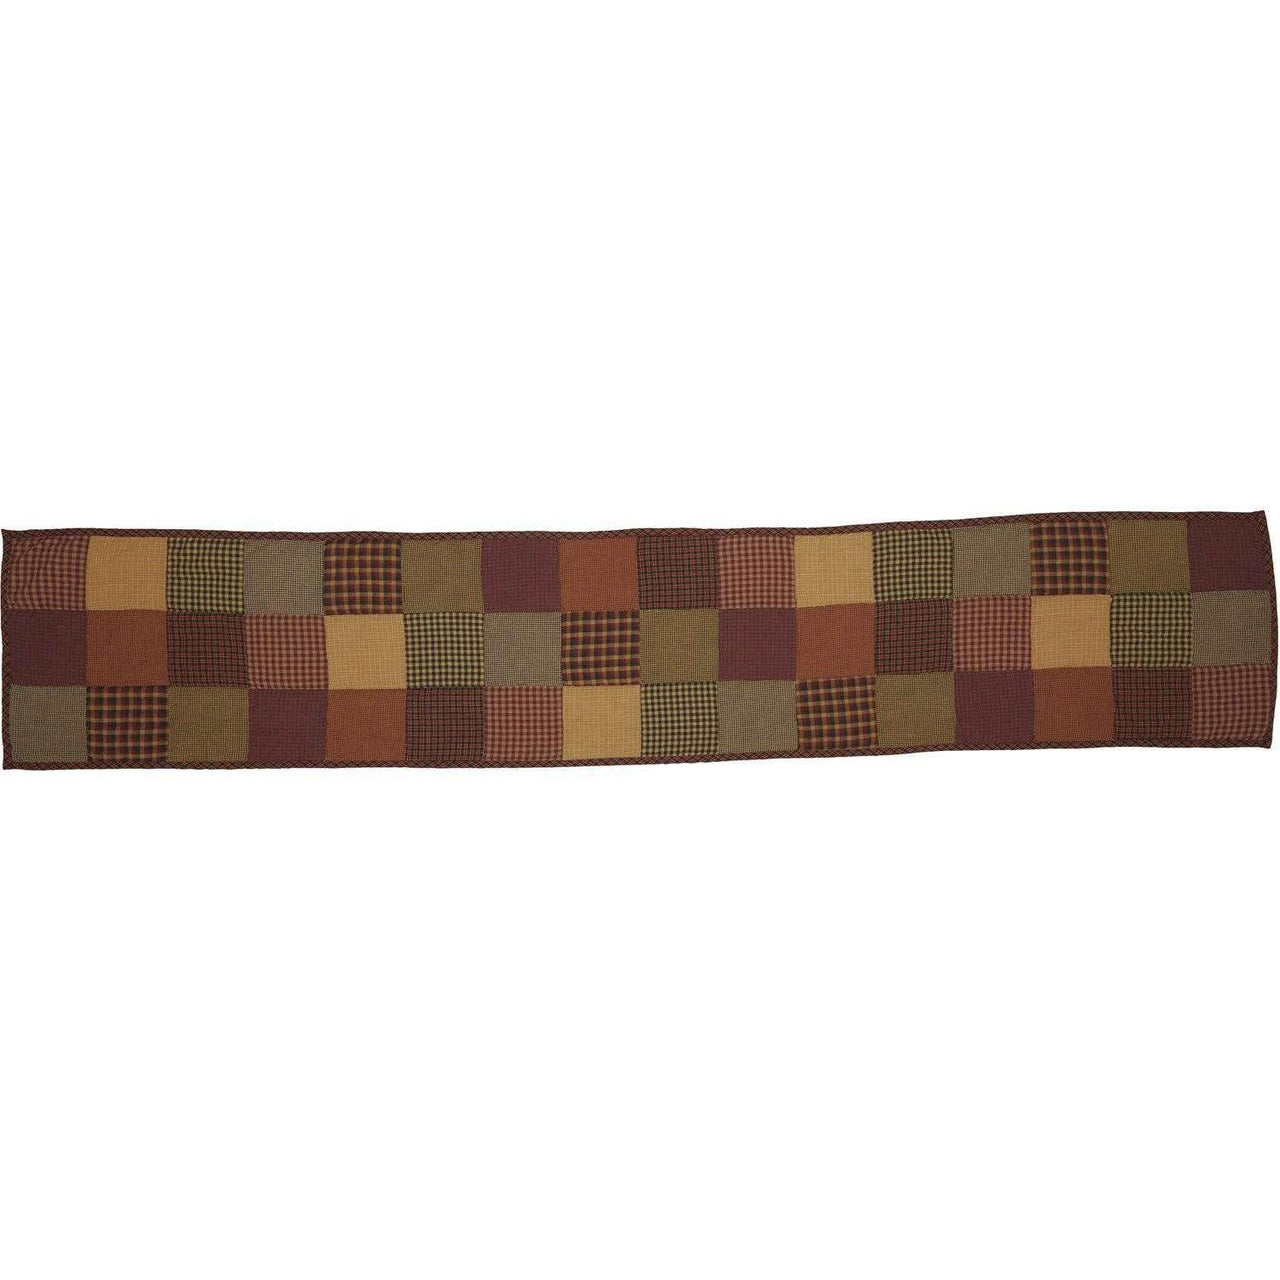 Heritage Farms Quilted Runner 13x72 VHC Brands - The Fox Decor